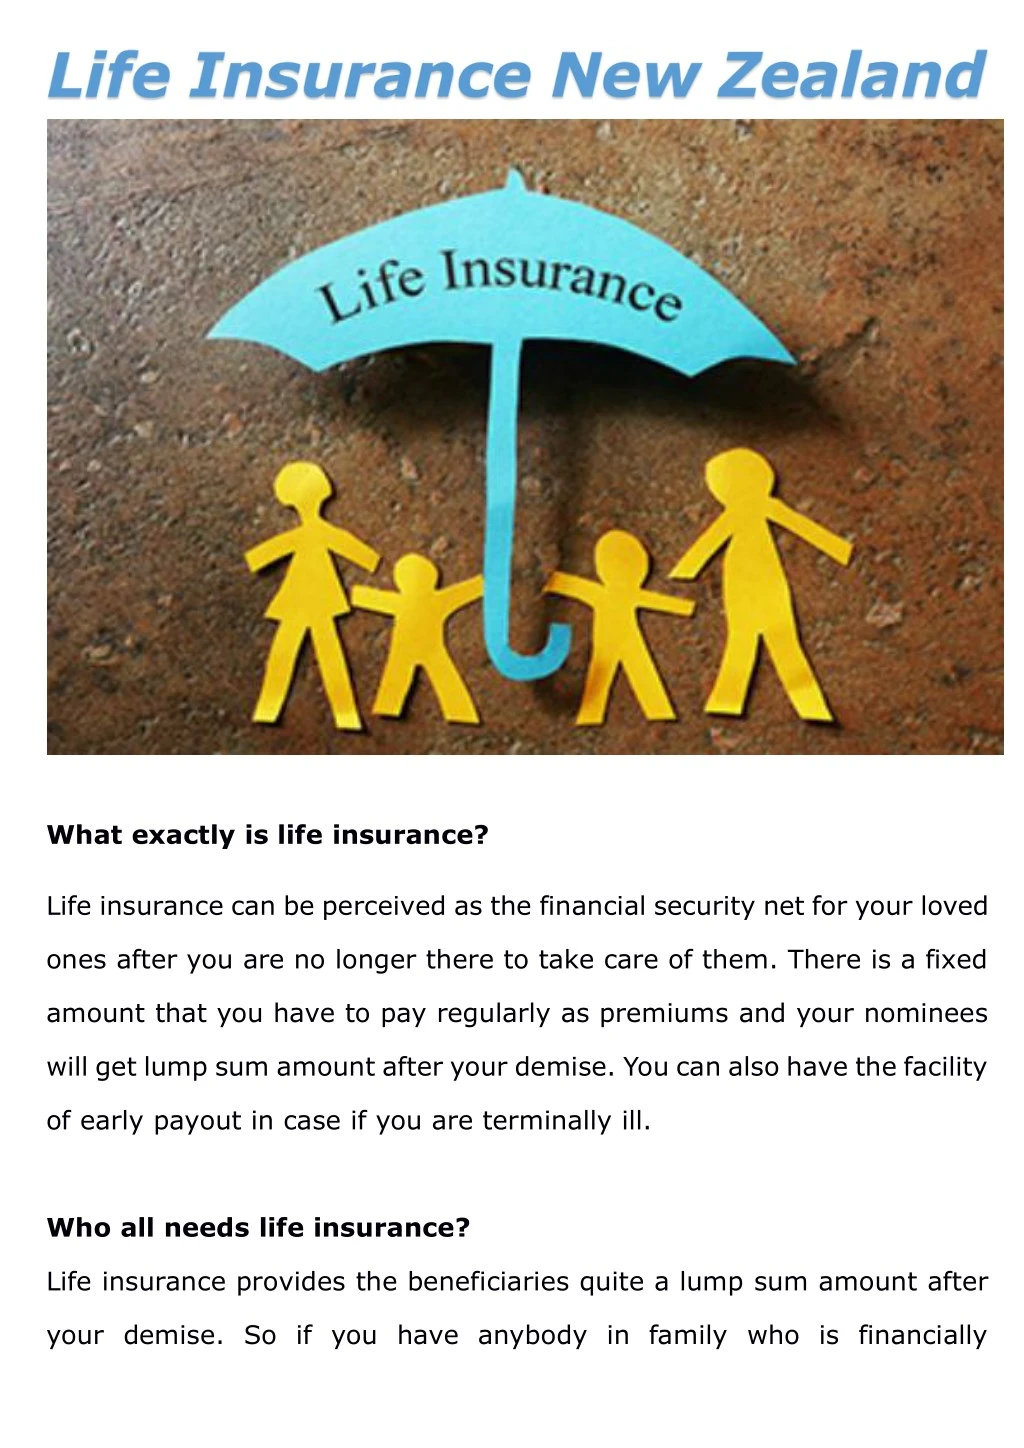 what exactly is life insurance